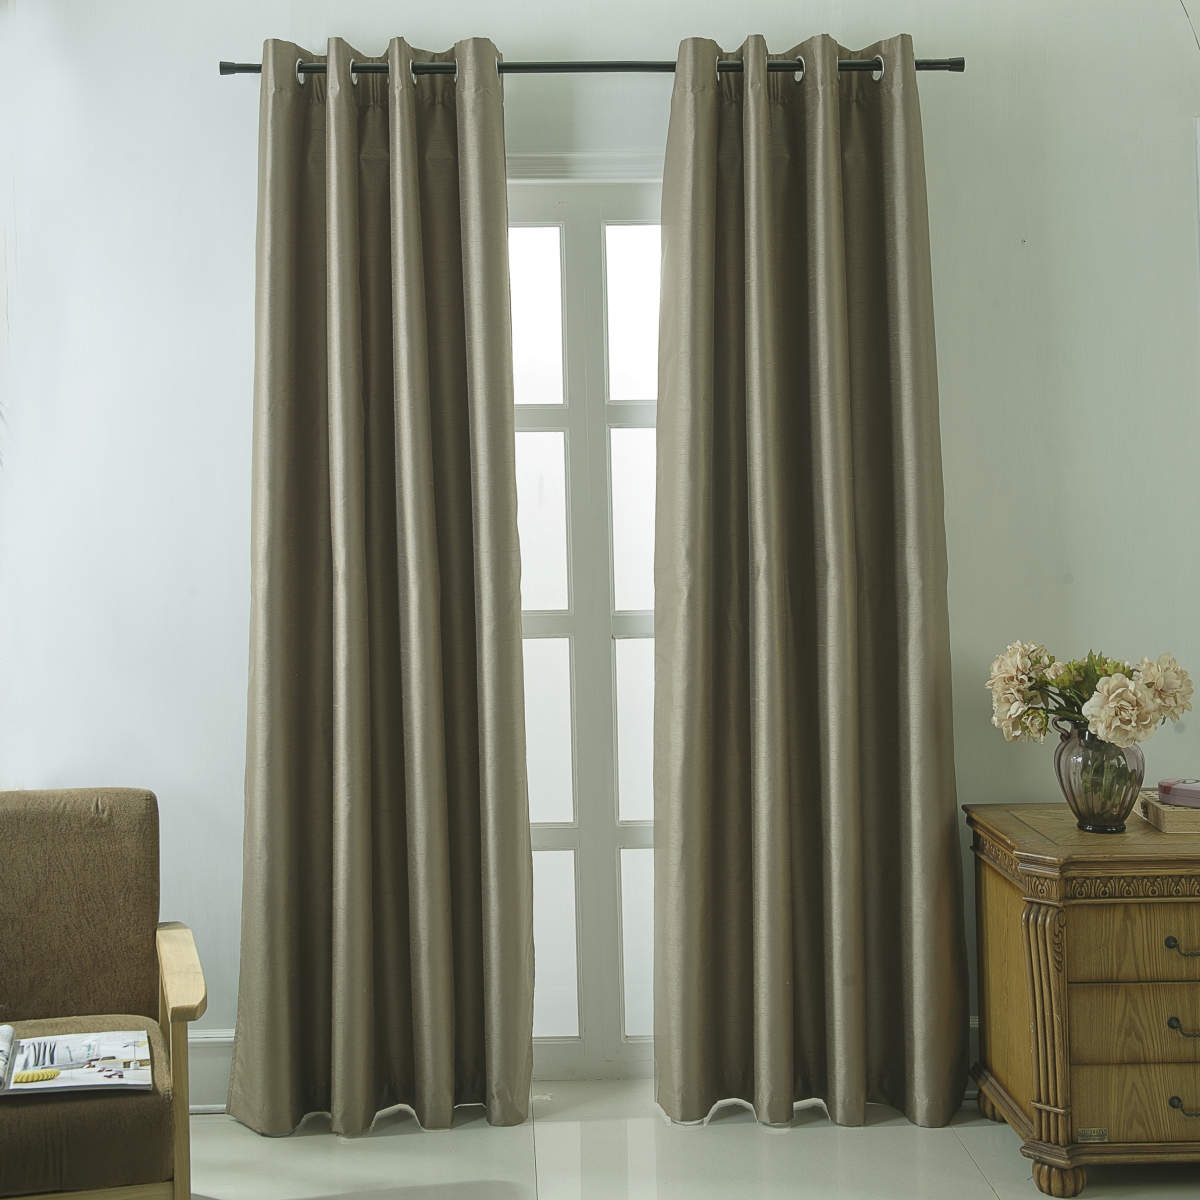 Pns18590 Shelton Faux Silk Room Darkening Grommet Single Curtain Panel In Taupe - 54 X 84 In.